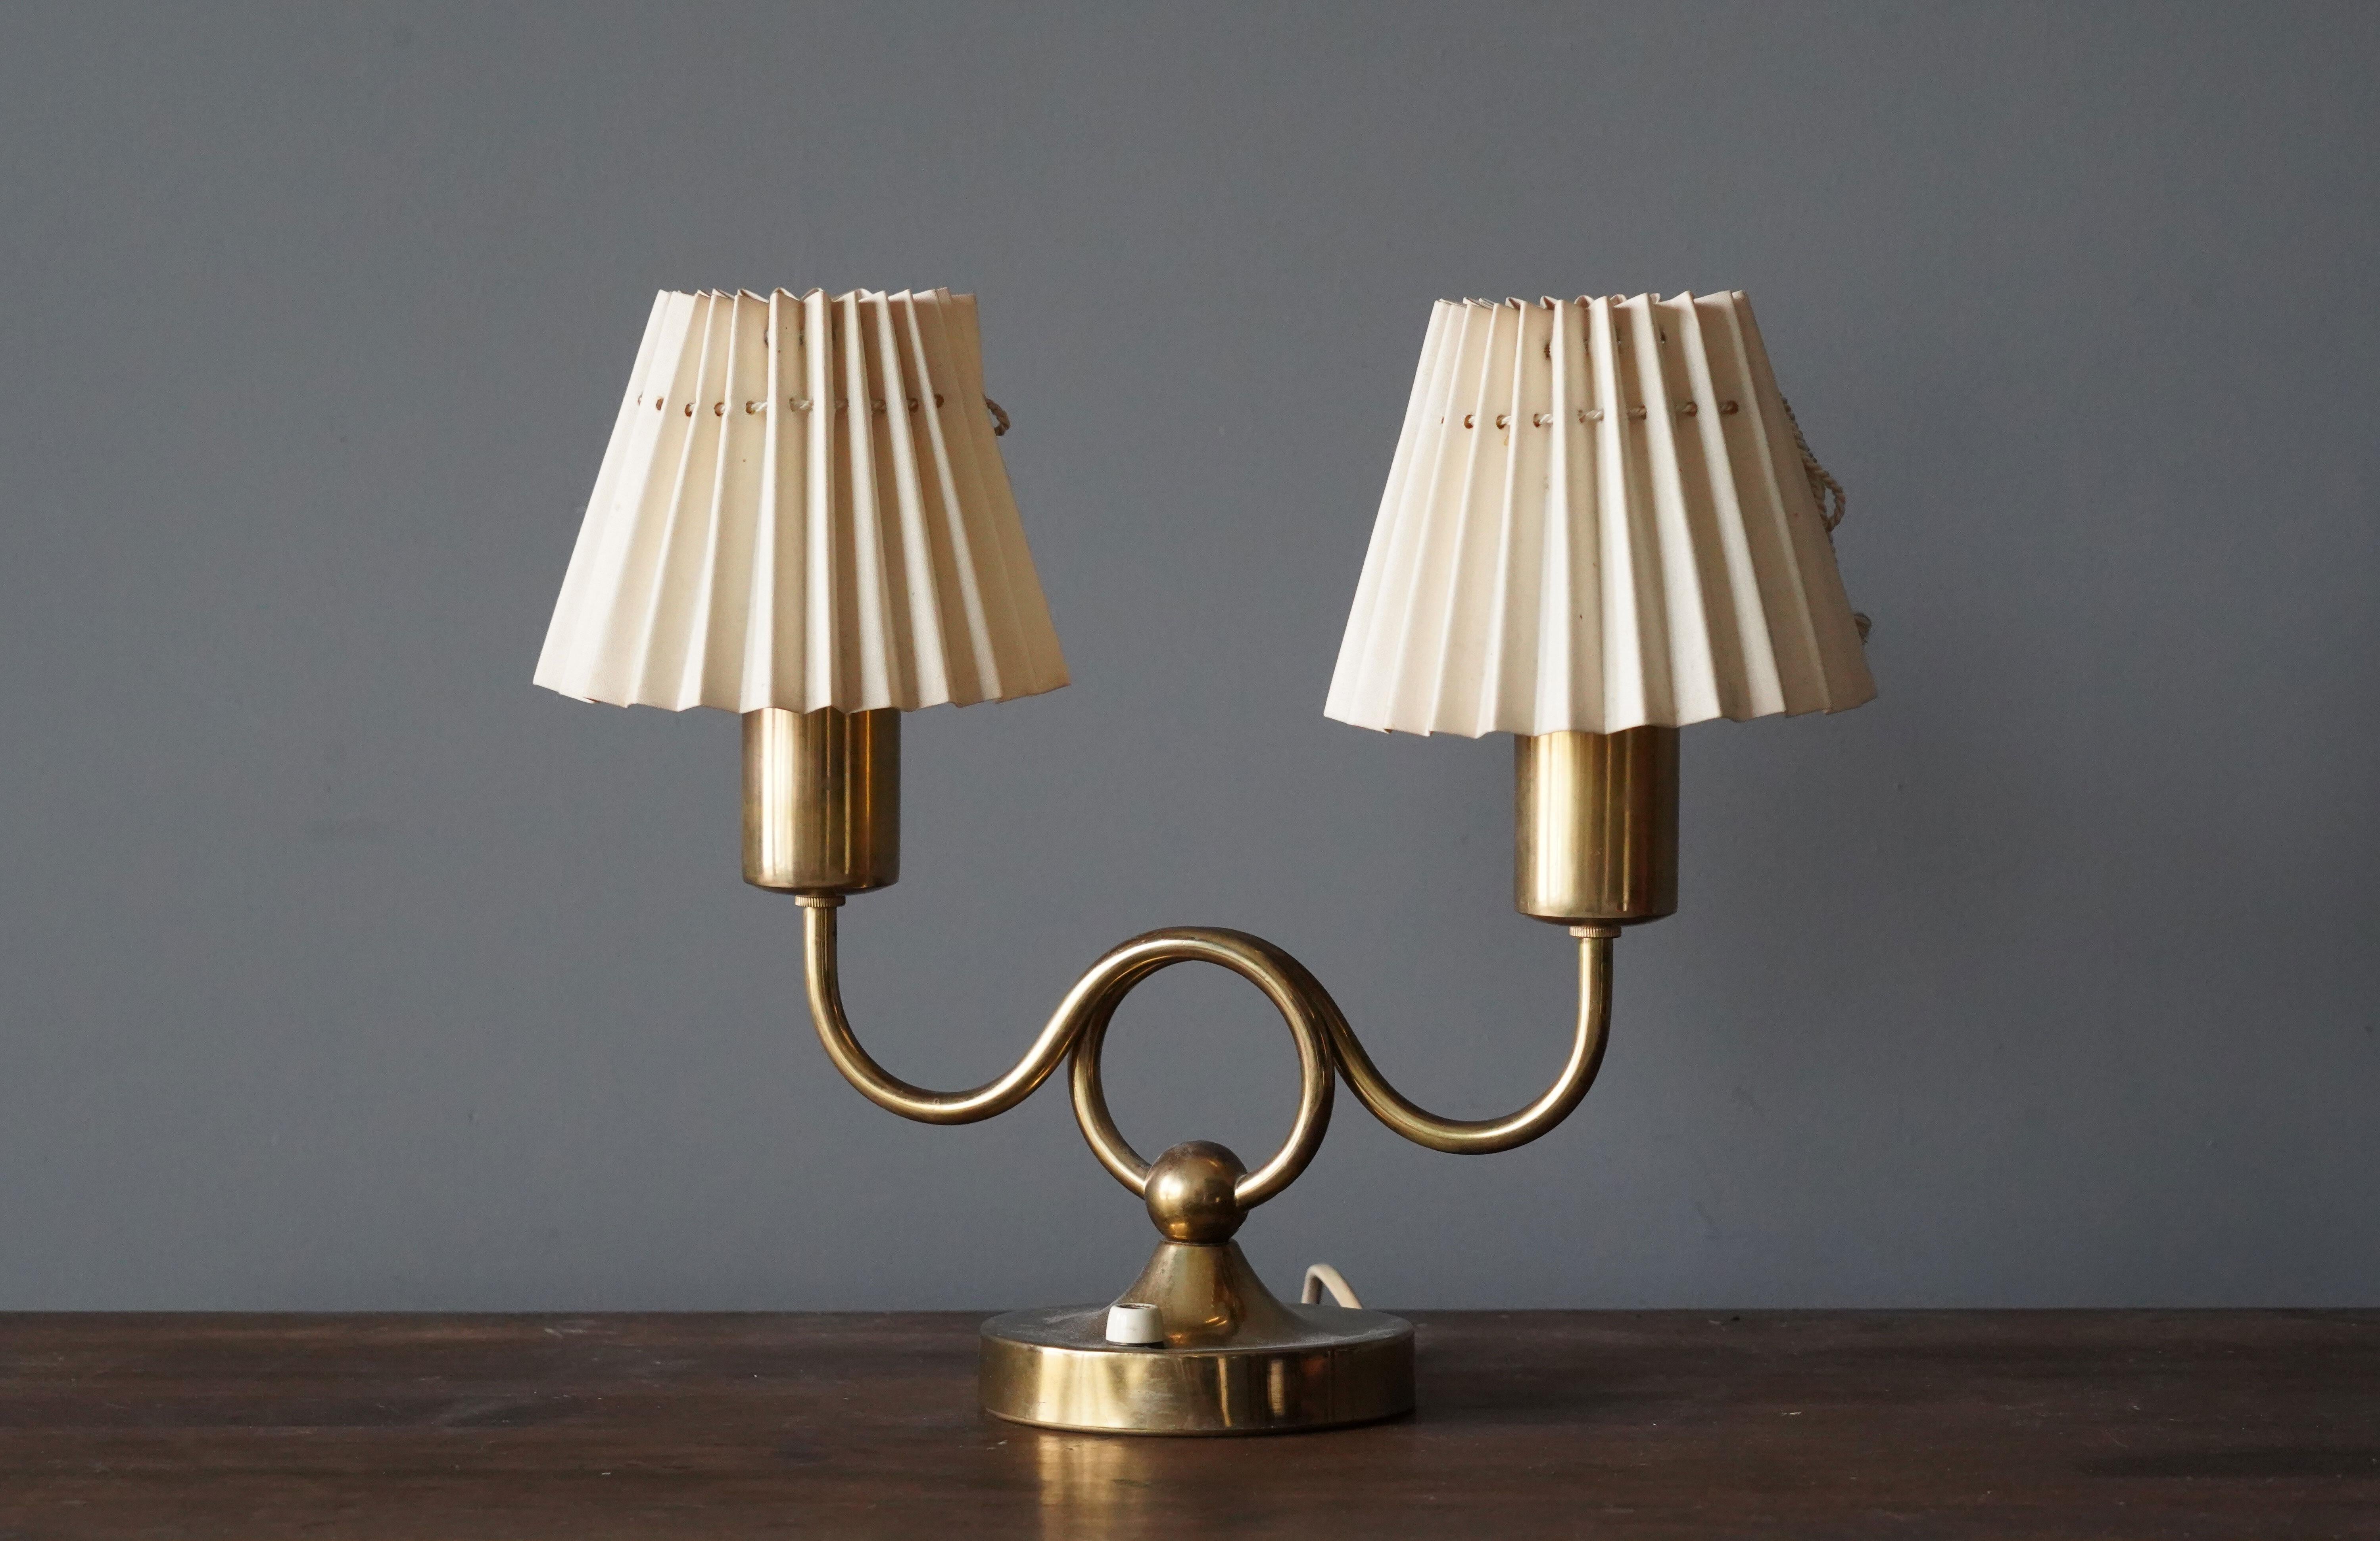 An early production table lamp by Josef Frank for Svenskt Tenn, Stockholm, Sweden. 

With brass and original paper shades.

Other lighting designers of the period include Paavo Tynell, Alvar Aalto, Serge Muille, and Angelo Lelii.